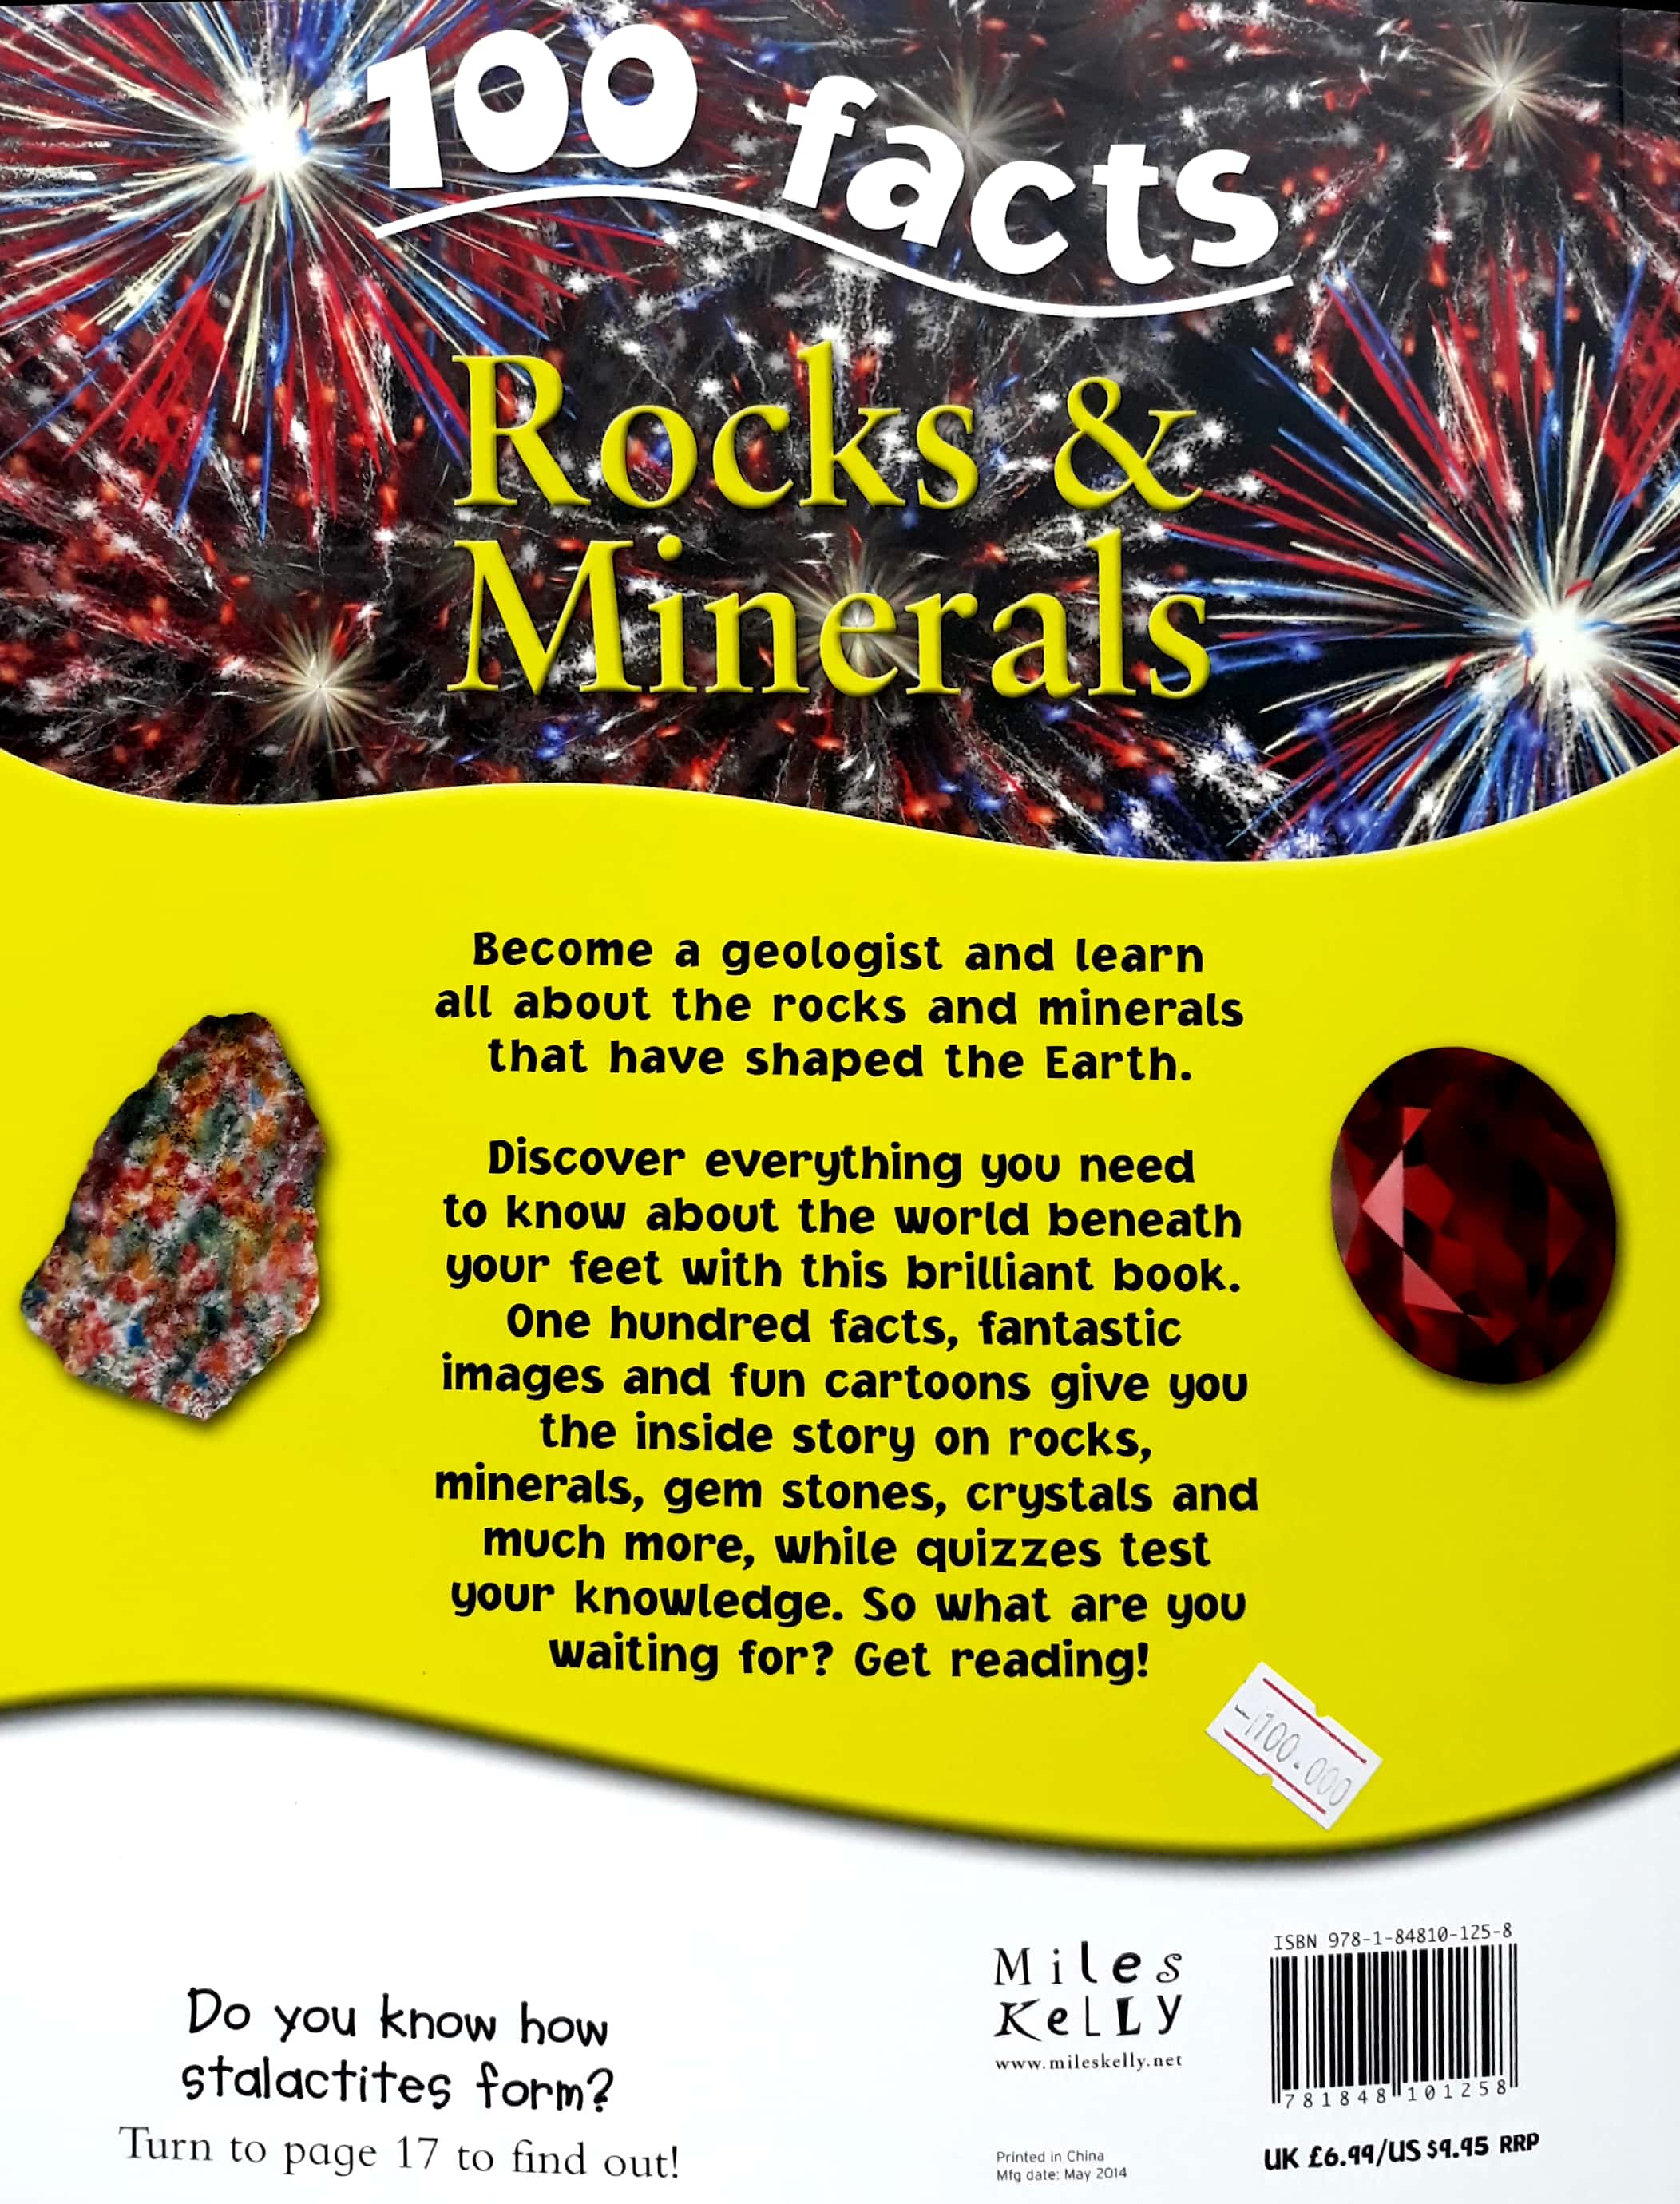 100 Facts on Rocks and Minerals